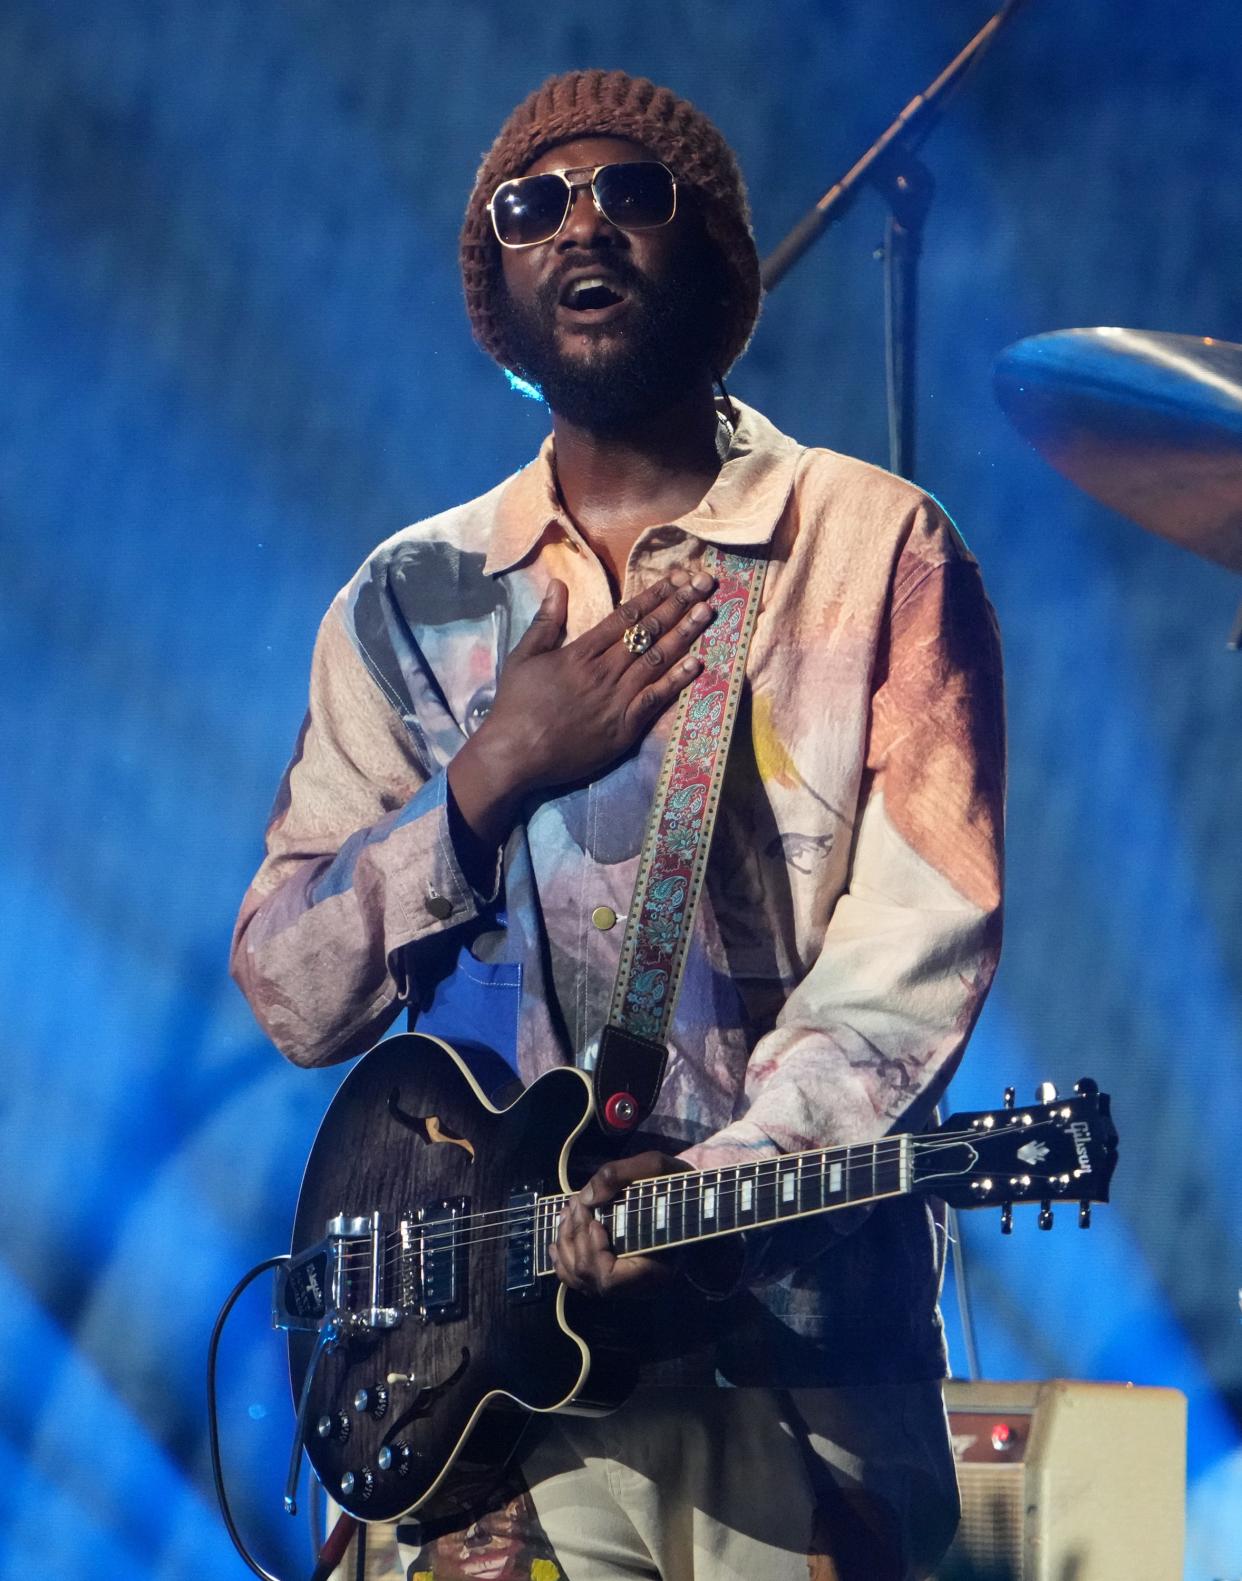 Gary Clark Jr. performed at the CMT Awards in Austin last spring.